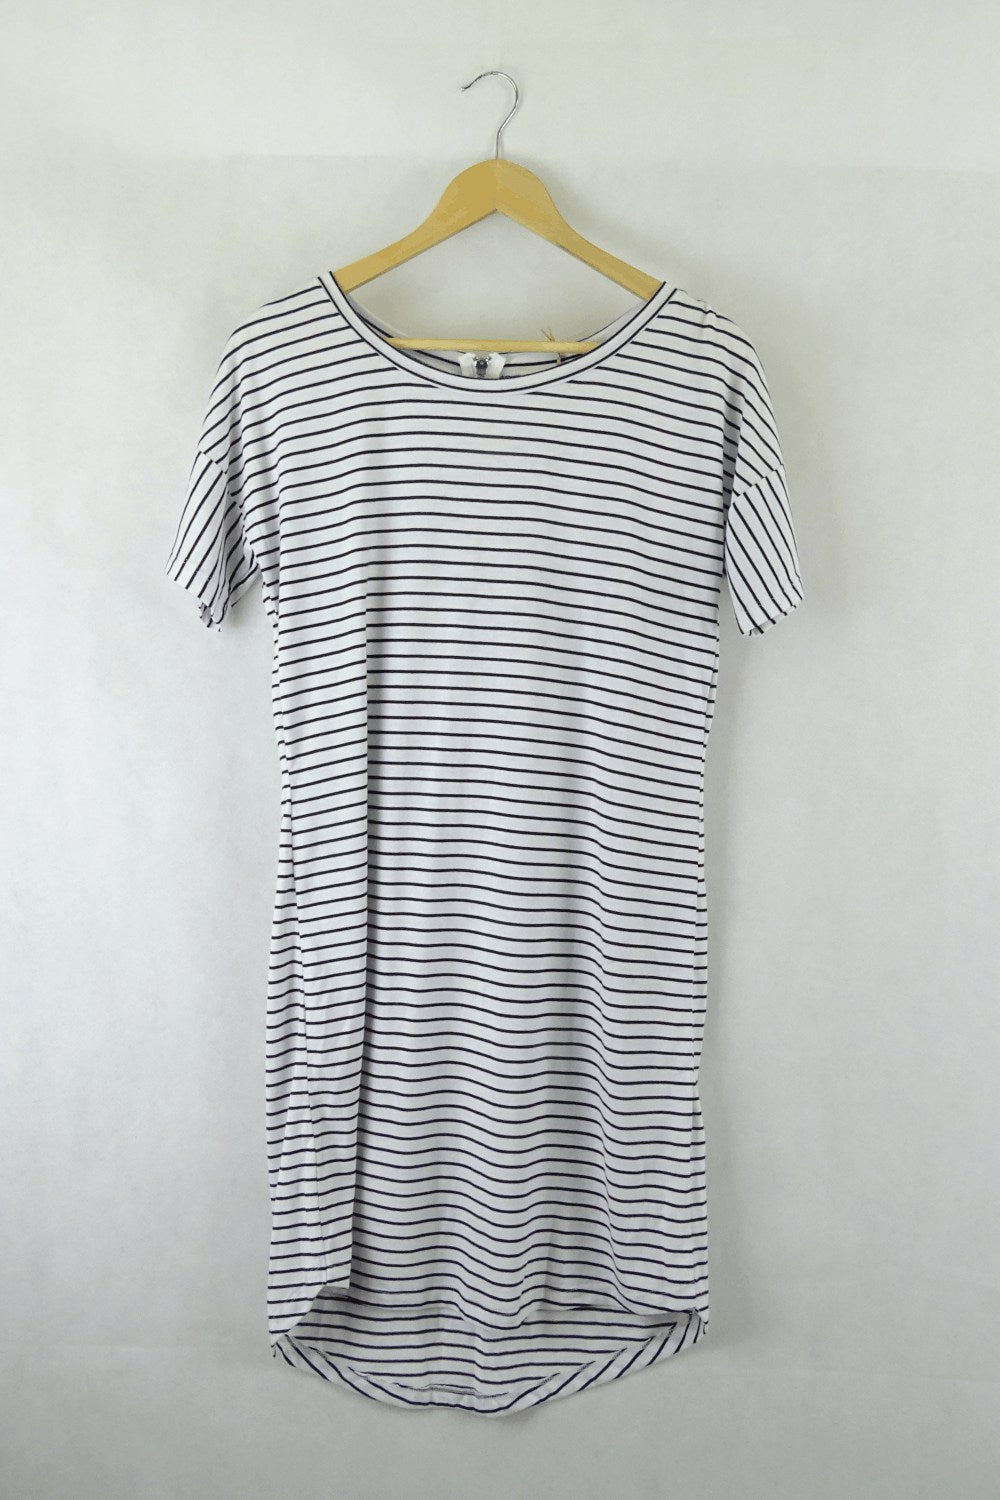 Seed Striped Black and White Dress XS